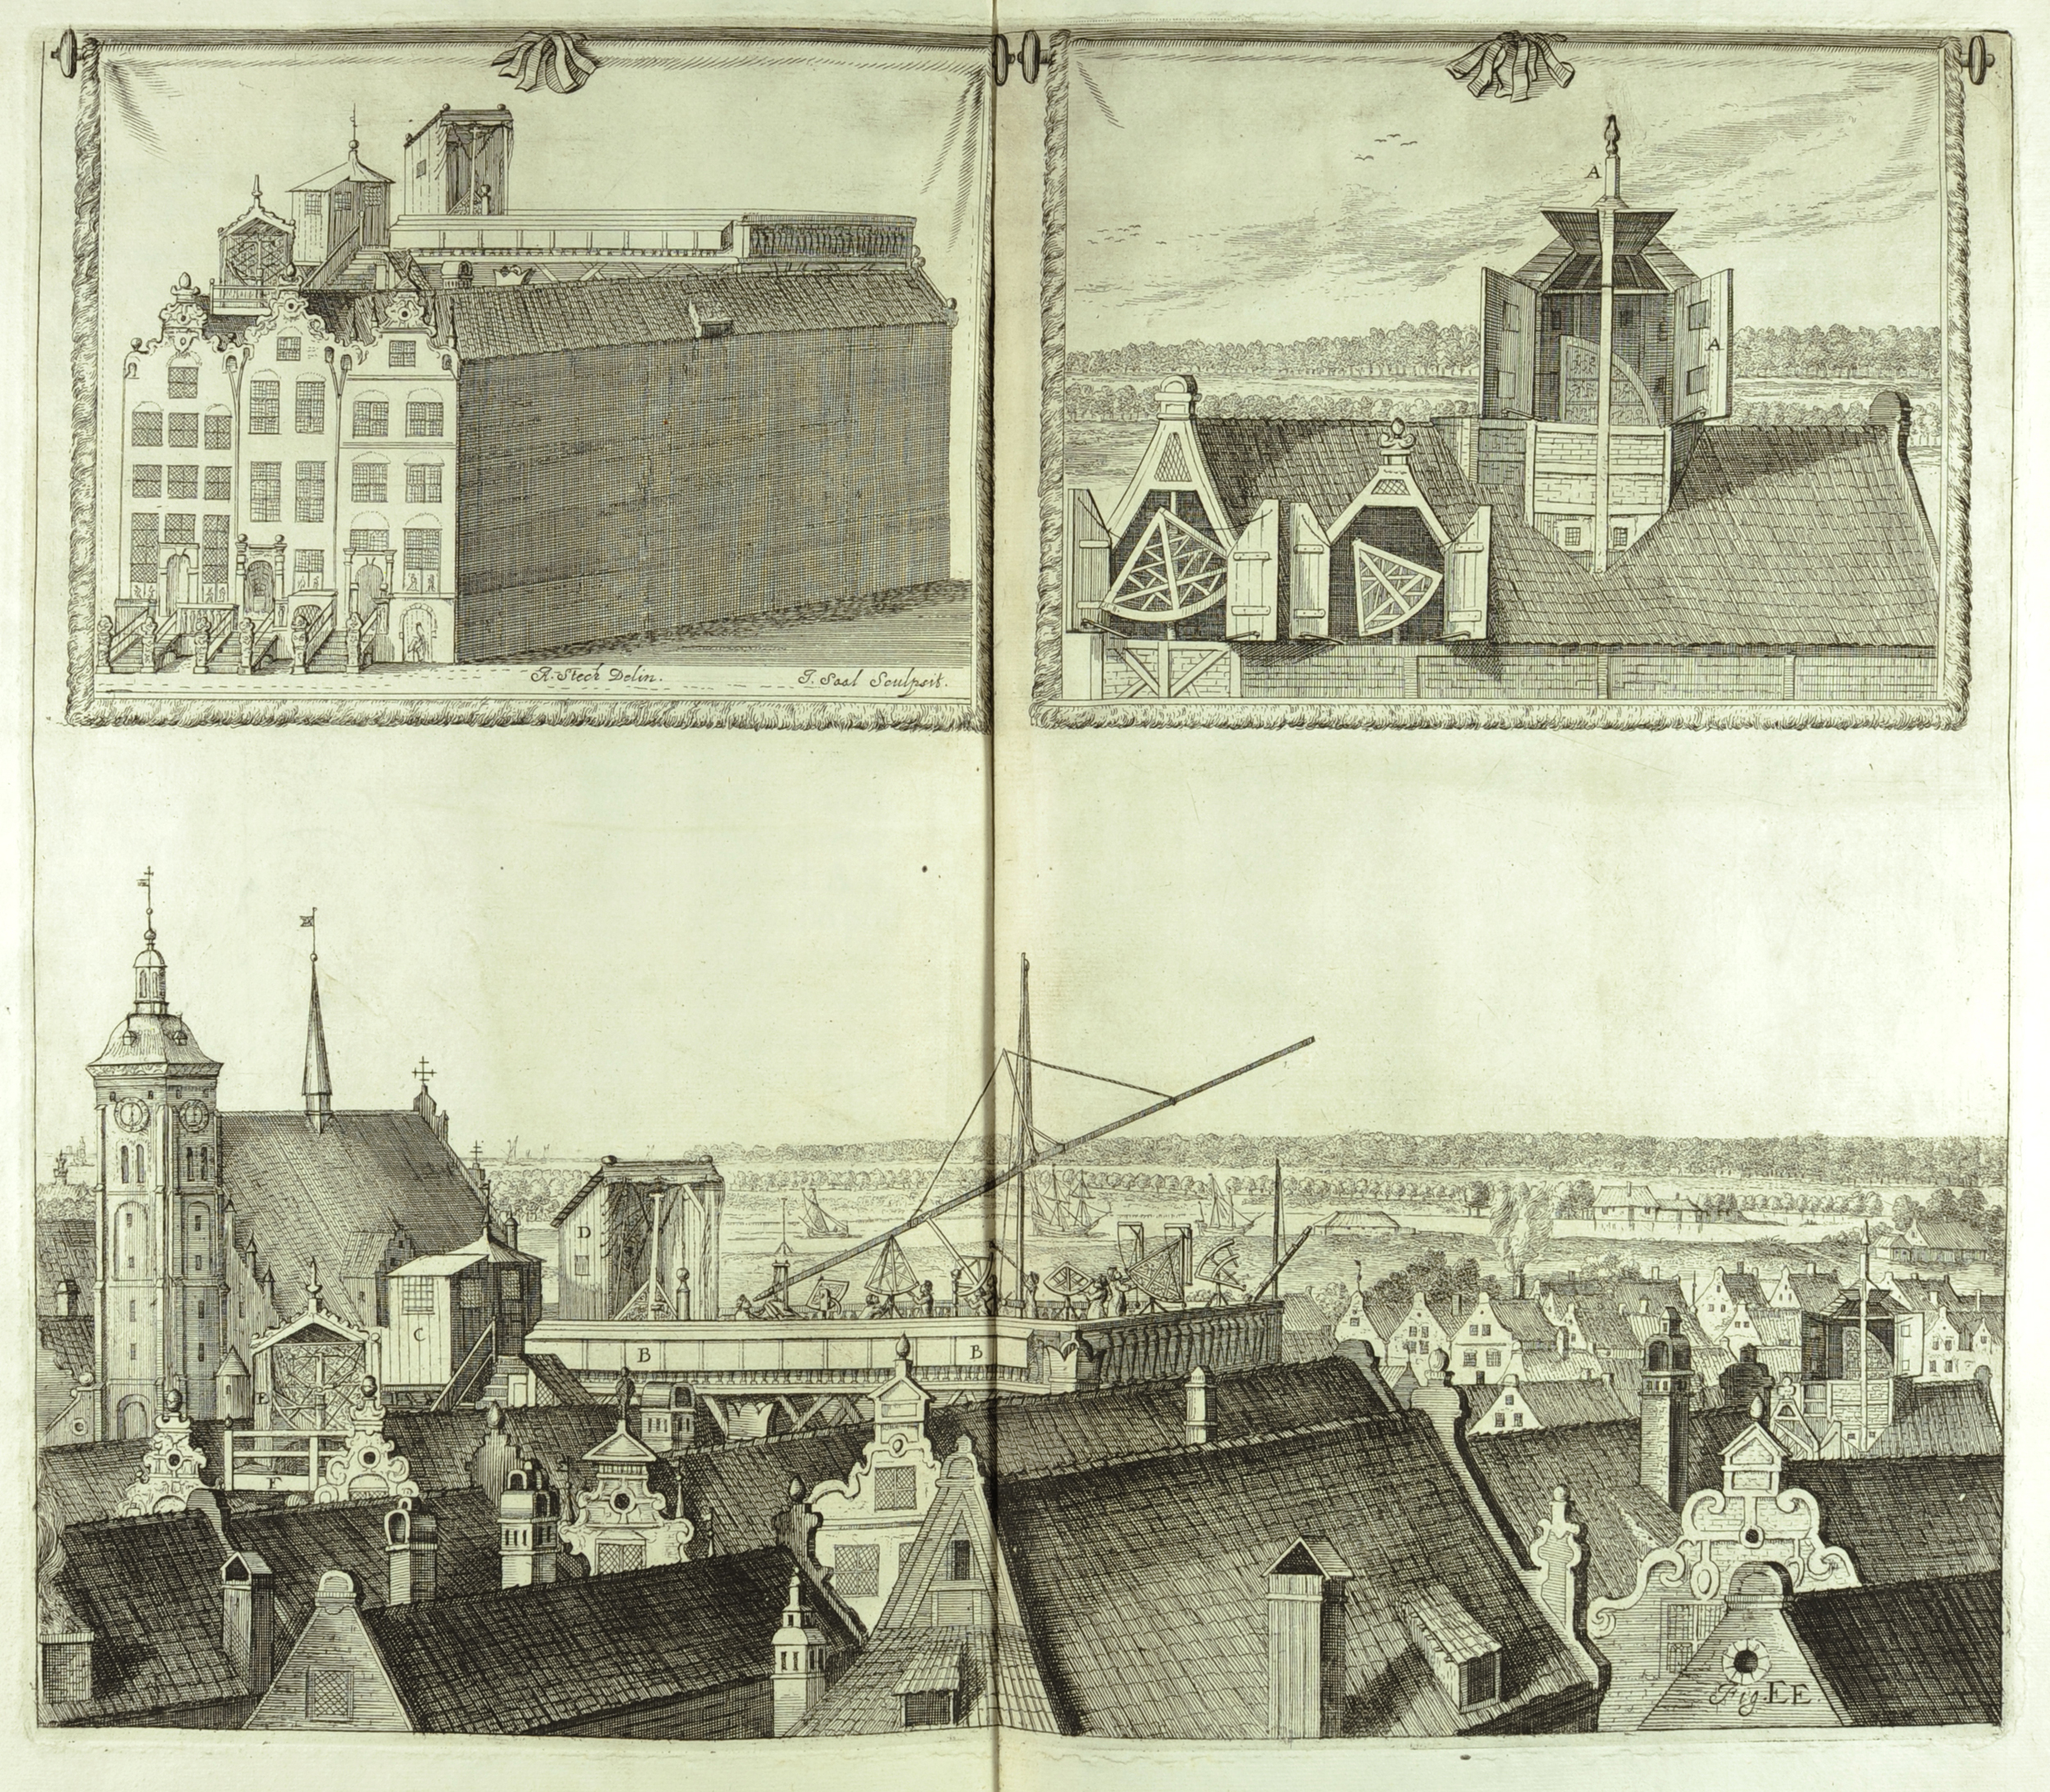 Three views of the observatory of Johannes Hevelius in Gdańsk which spanned the rooftops of three homes, from his Machinae coelestis (St